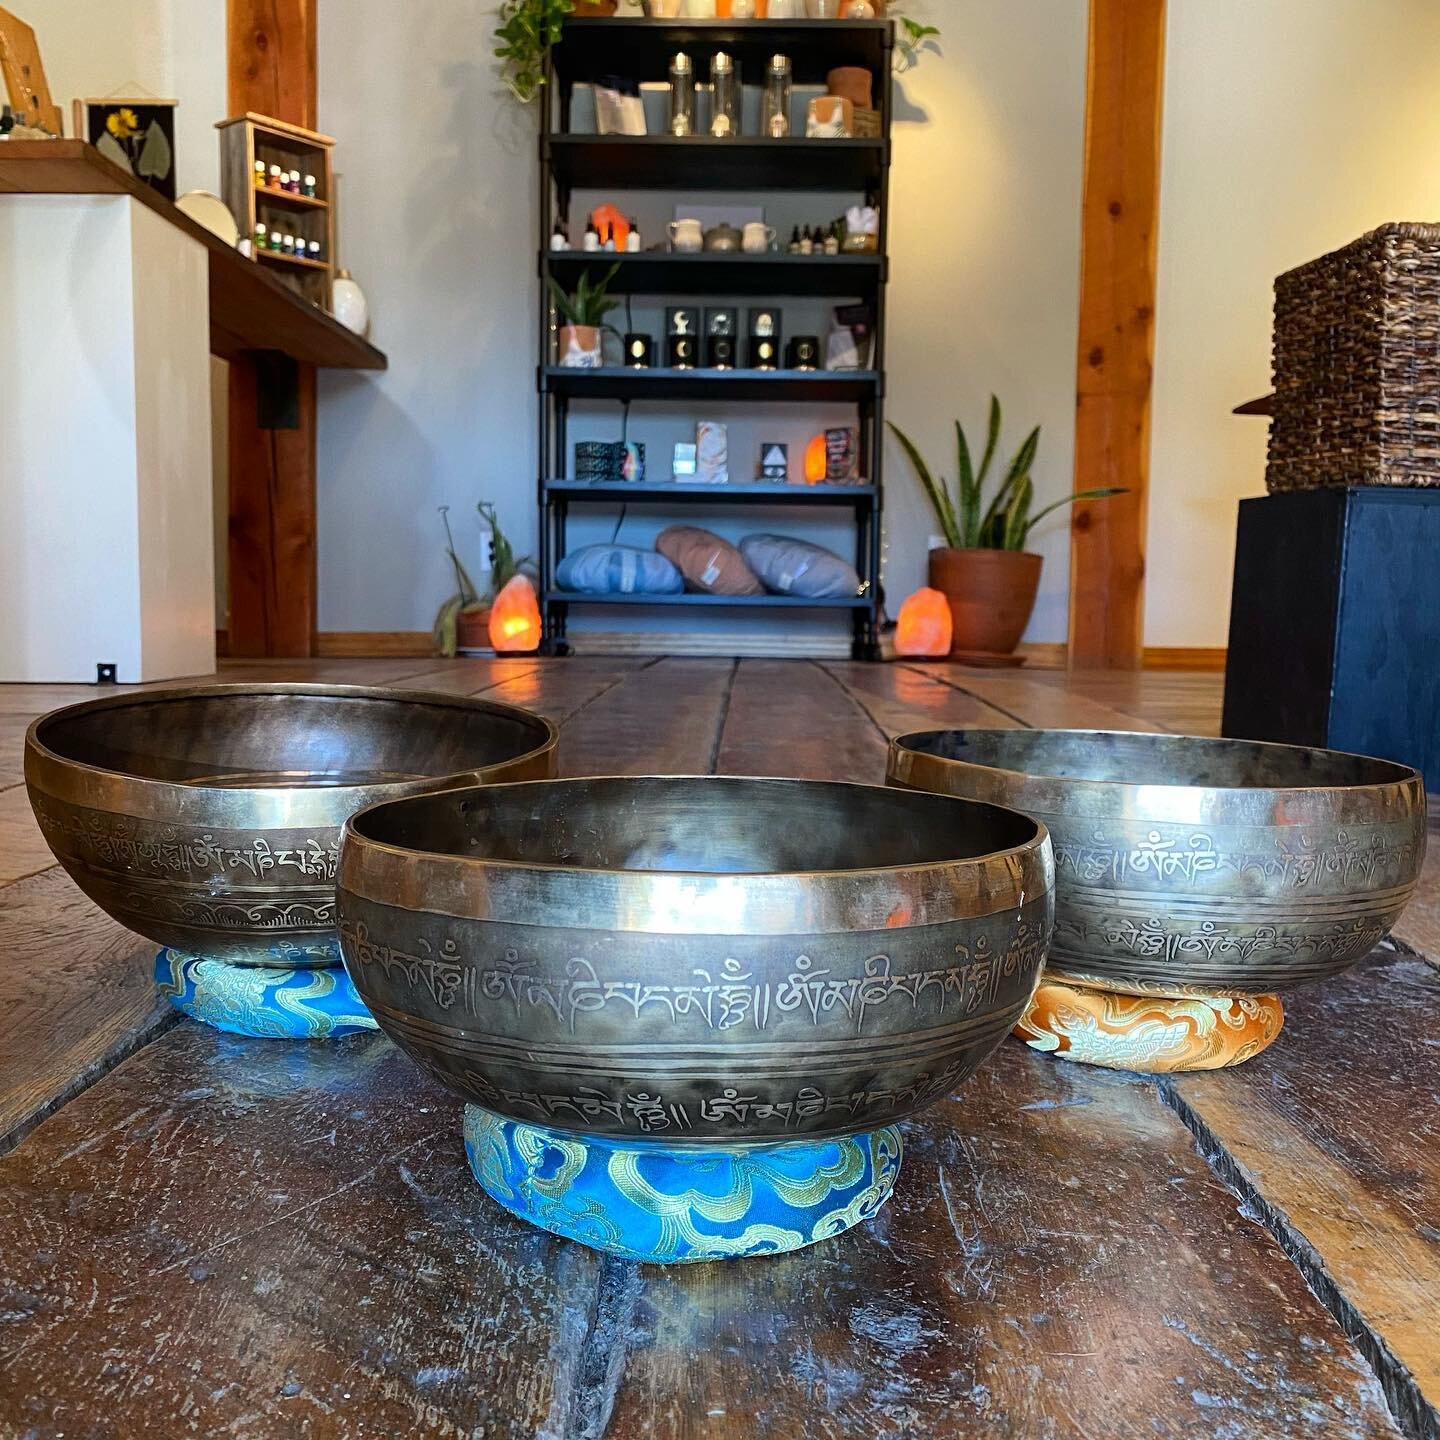 Today is a very special day, because singing bowls have finally arrived at Blue Lotus! Handmade in Nepal by a family that has been crafting them for four generations, these bowls are ready to do some incredible vibrational work. Their tones are incre